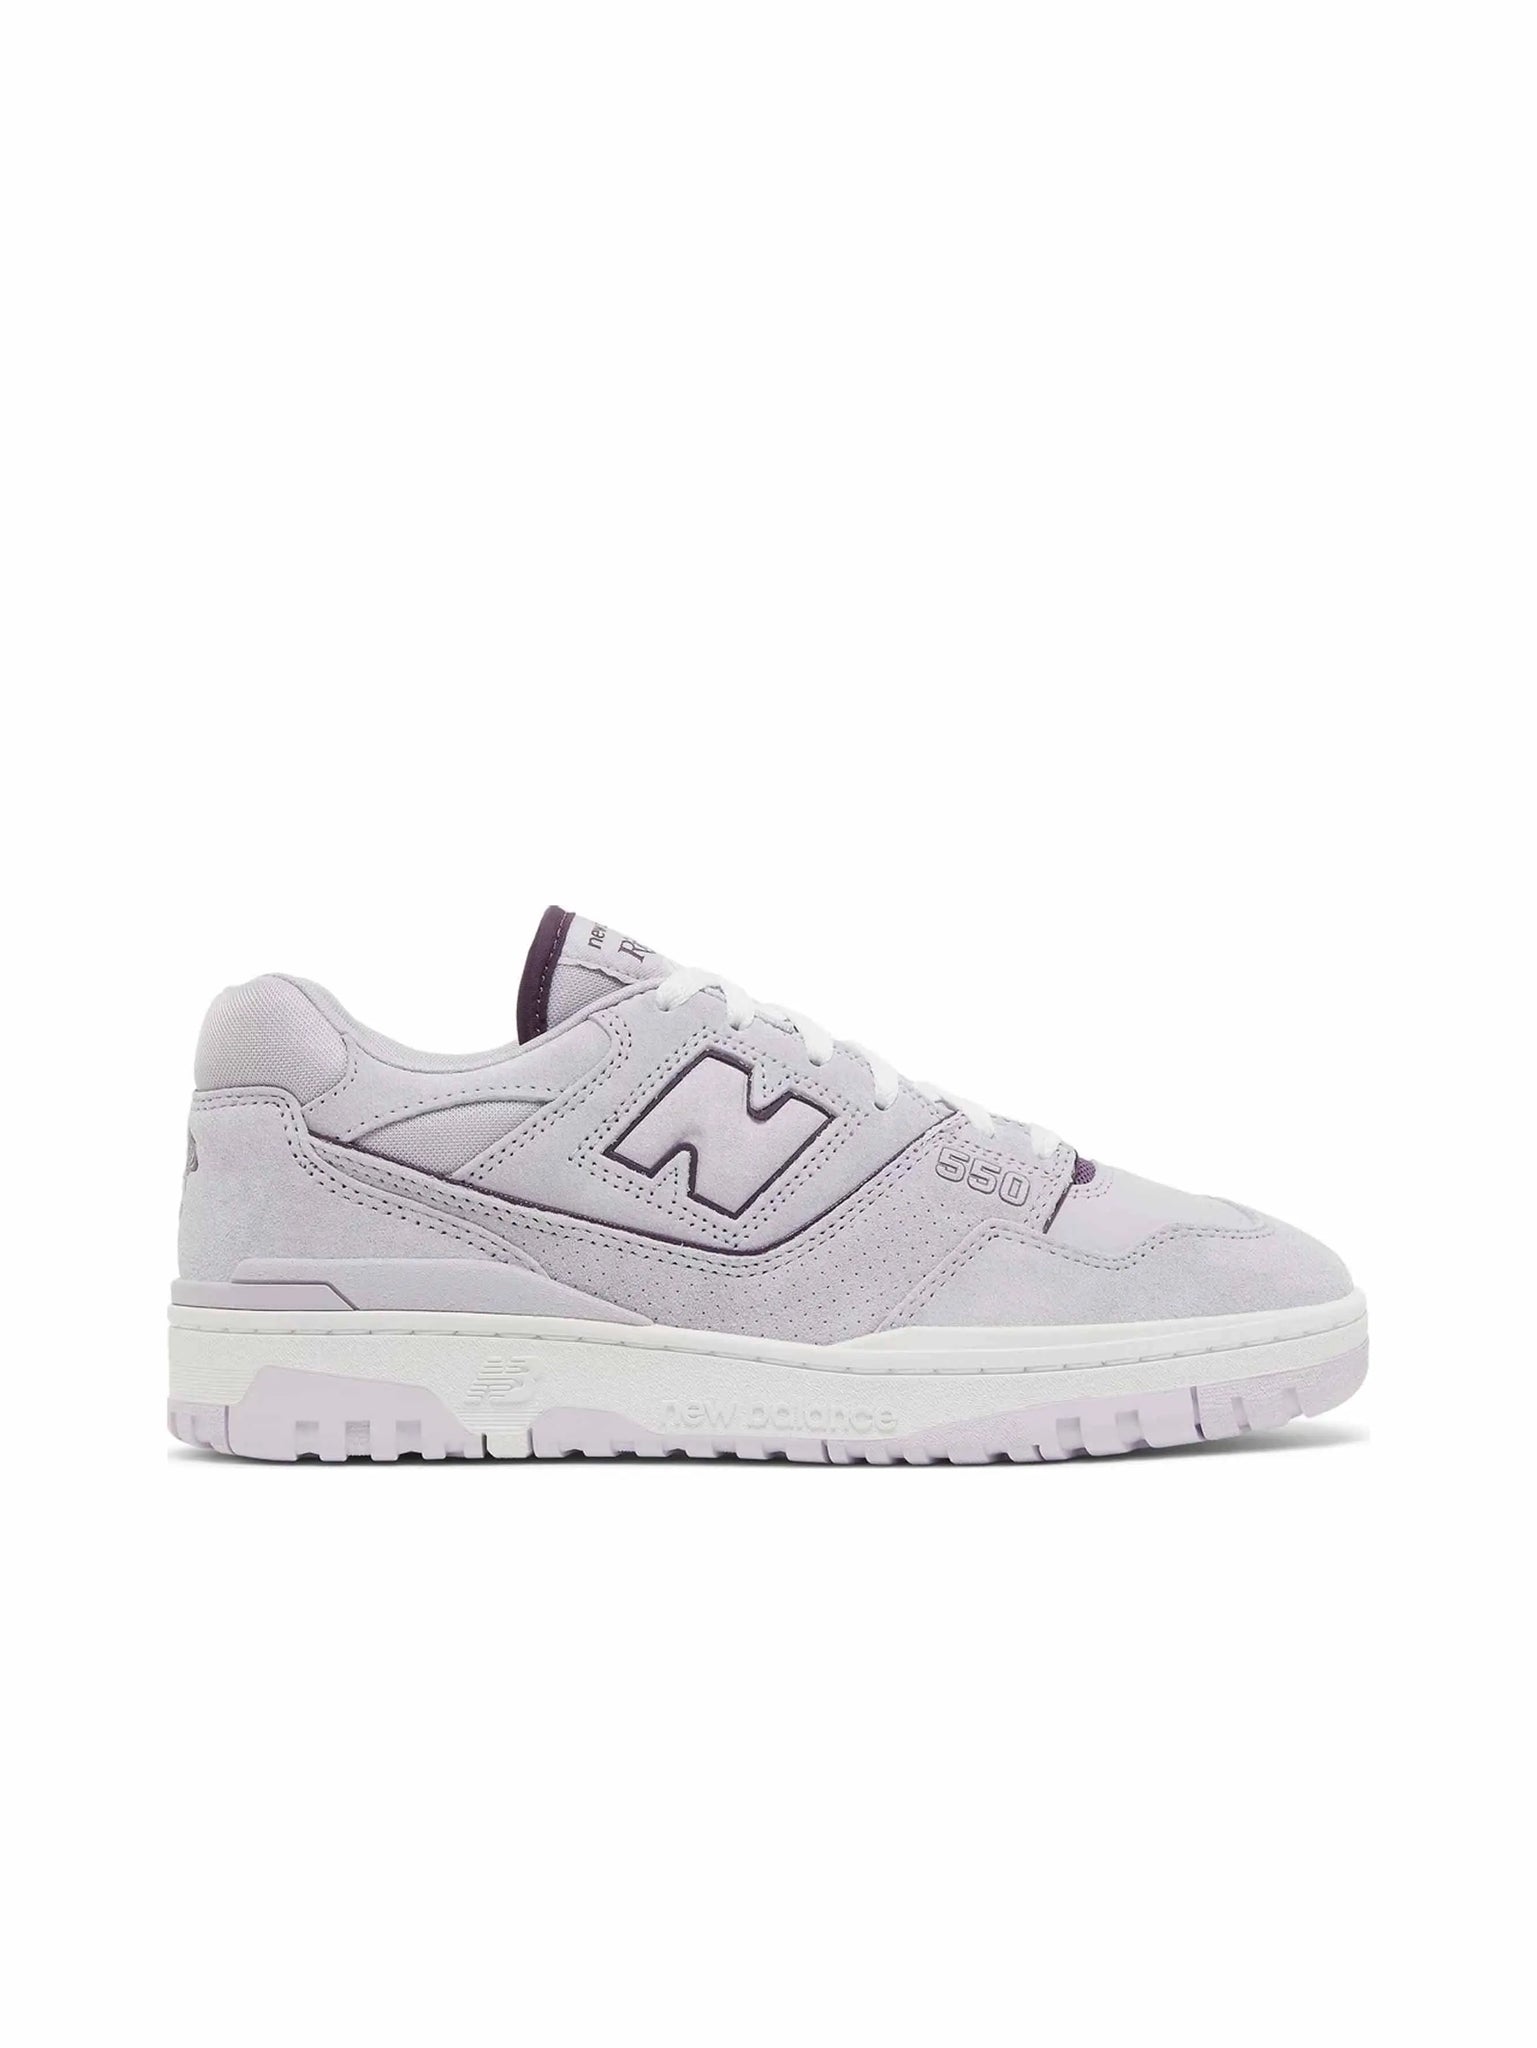 New Balance 550 Rich Paul Forever Yours in Auckland, New Zealand - Shop name